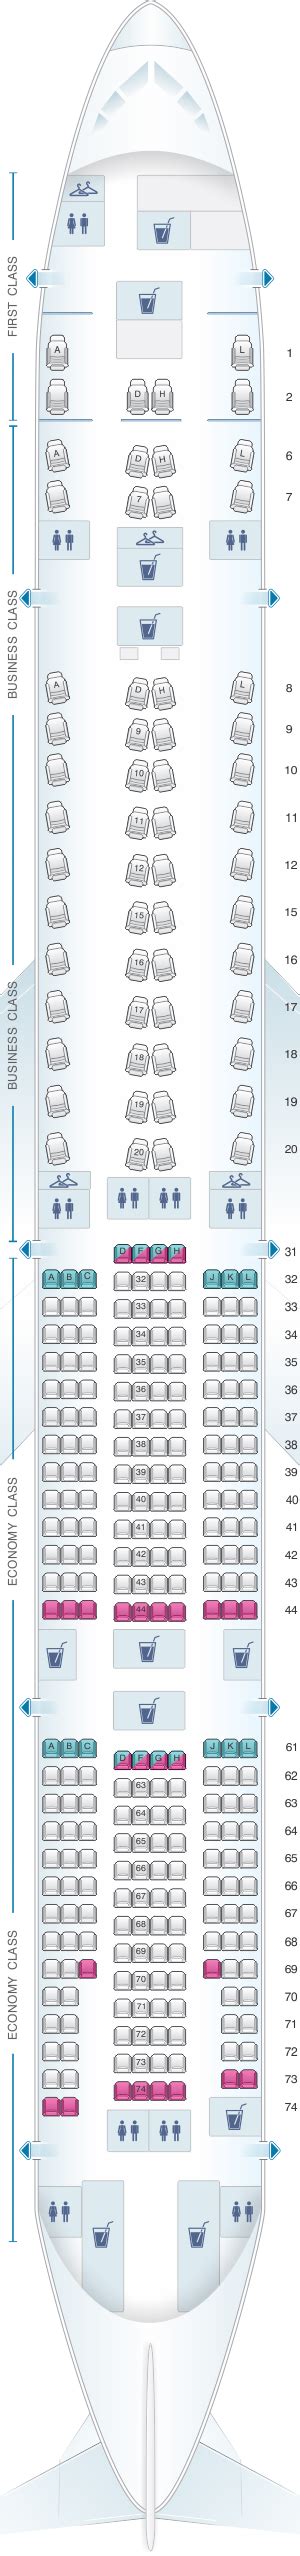 China Eastern Airlines Seat Map Cabinets Matttroy